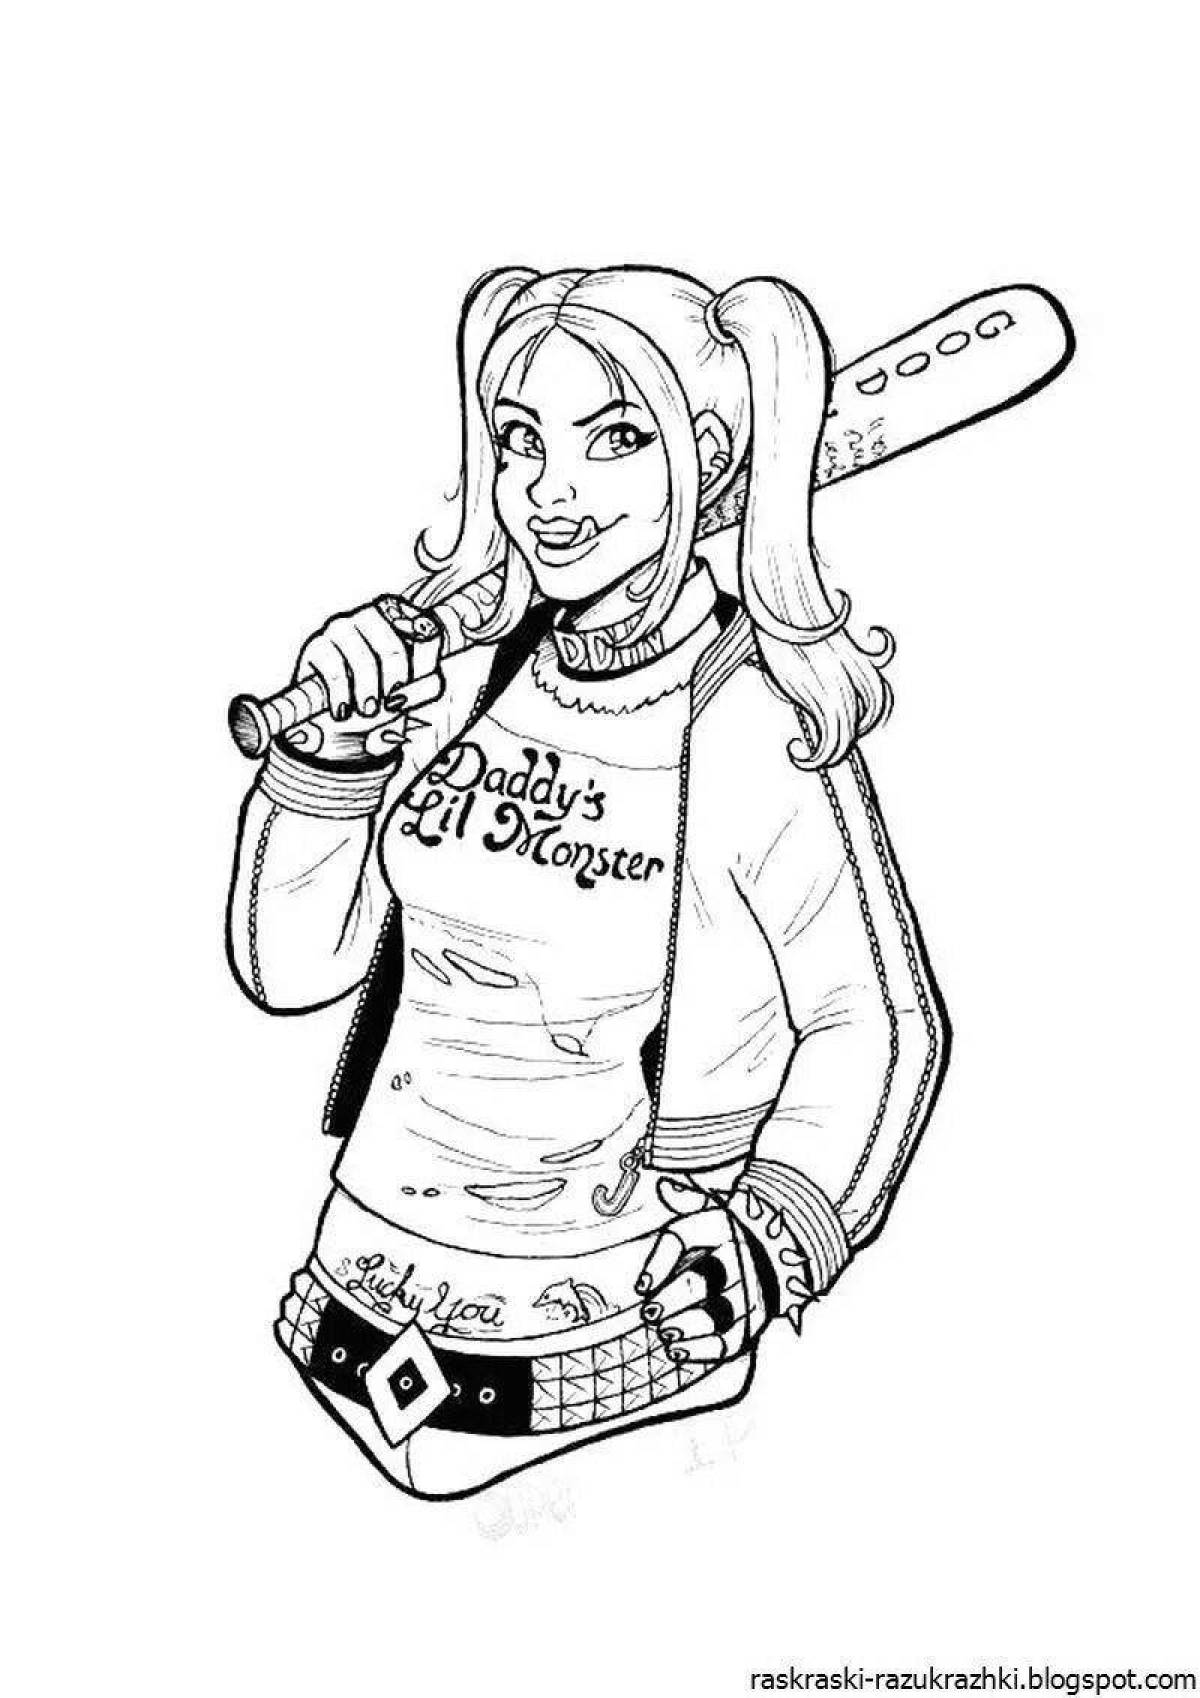 Adorable harley quinn coloring book for girls